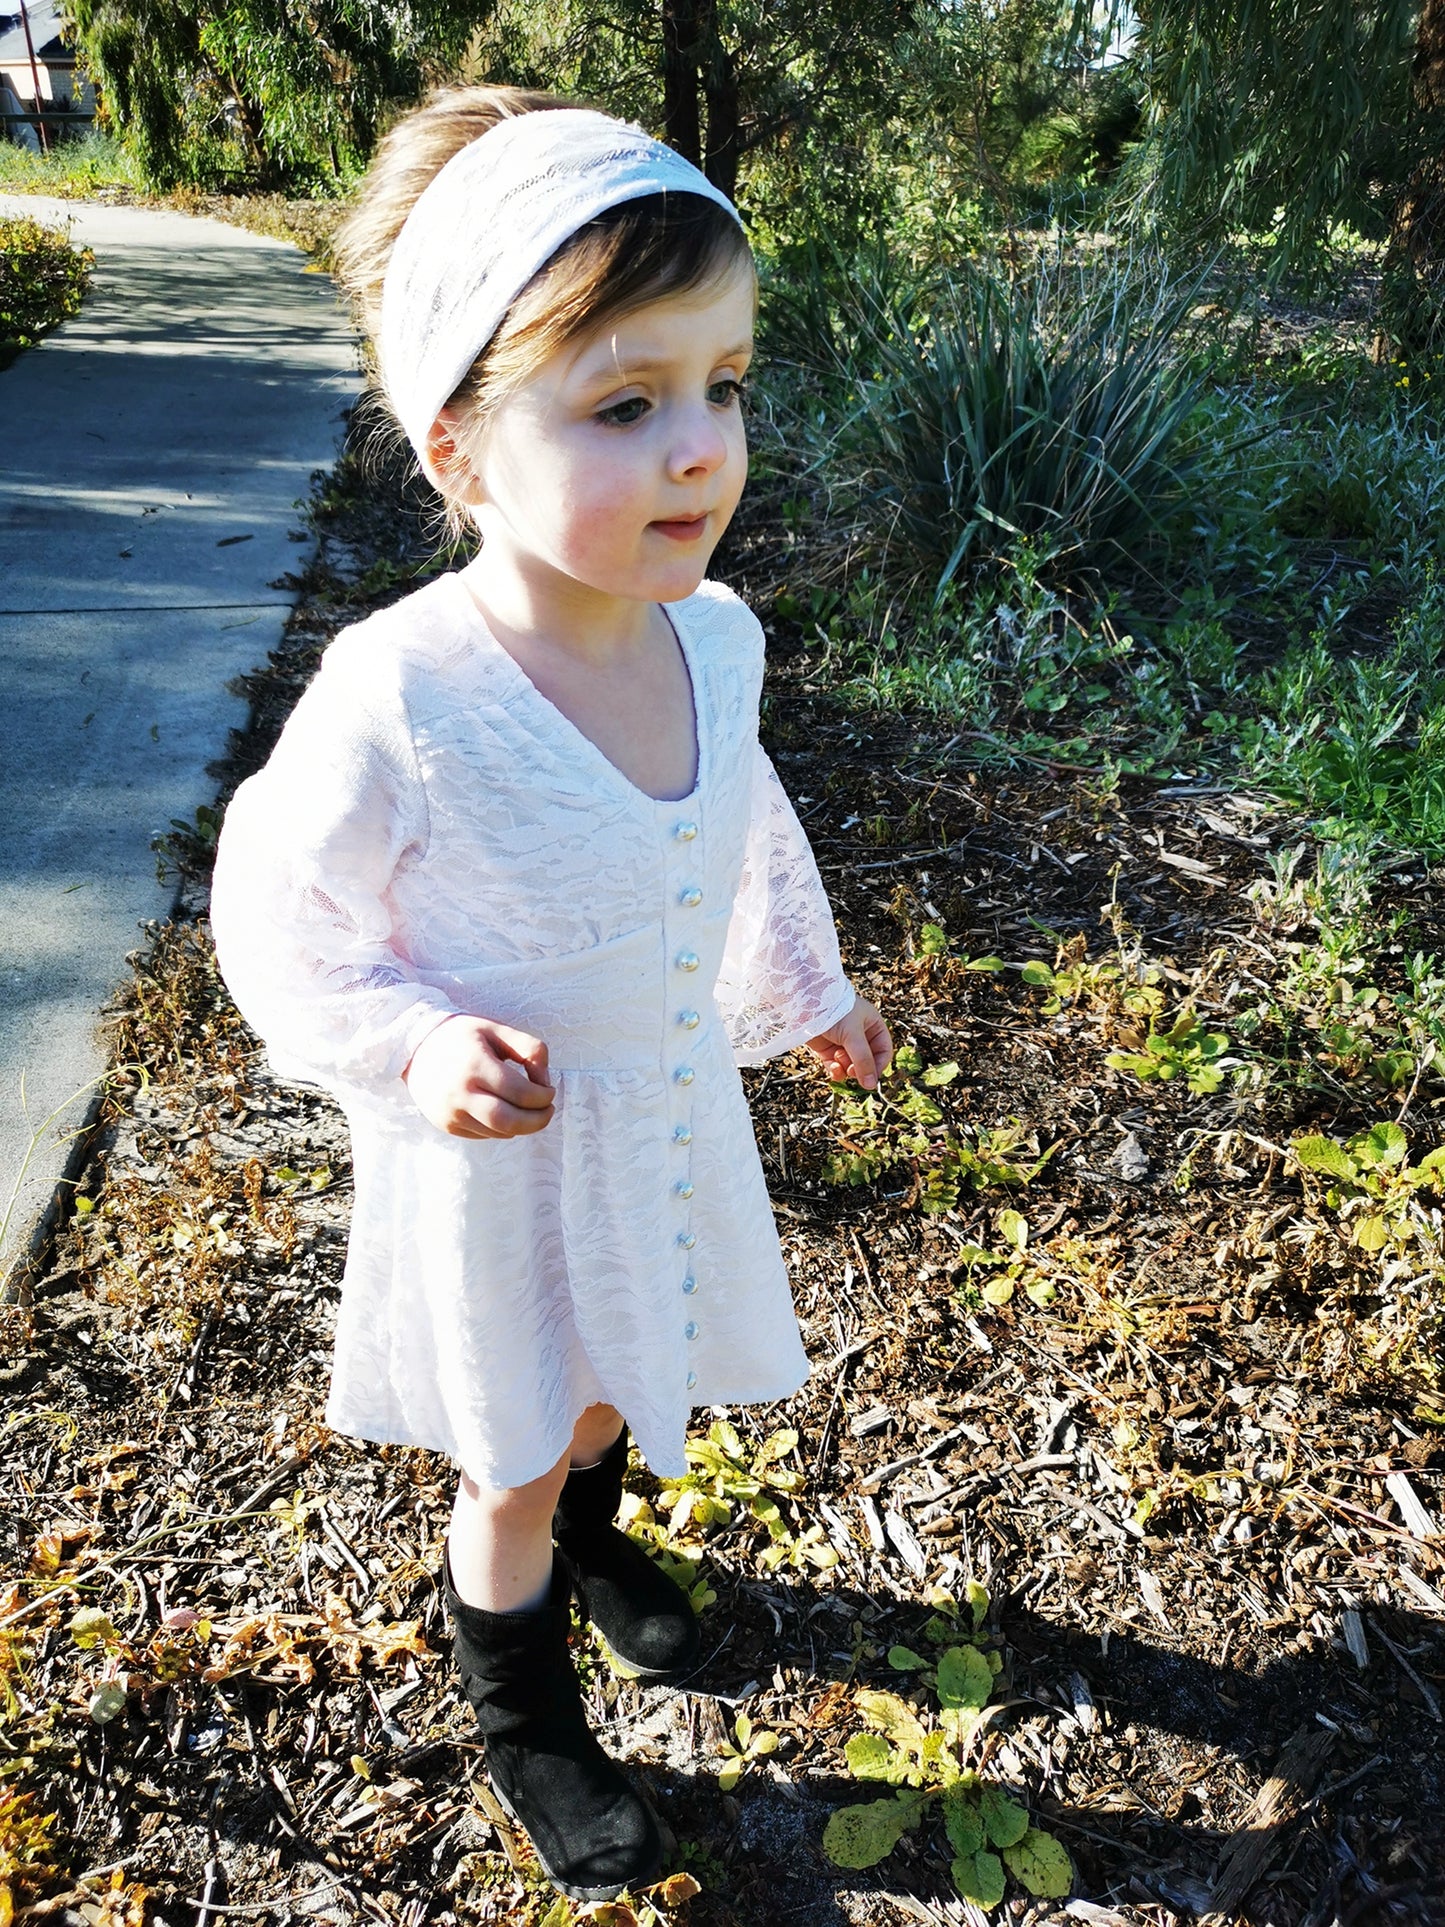 Missy Rose Daydream Dress - Children's and Teens PDF Sewing Pattern